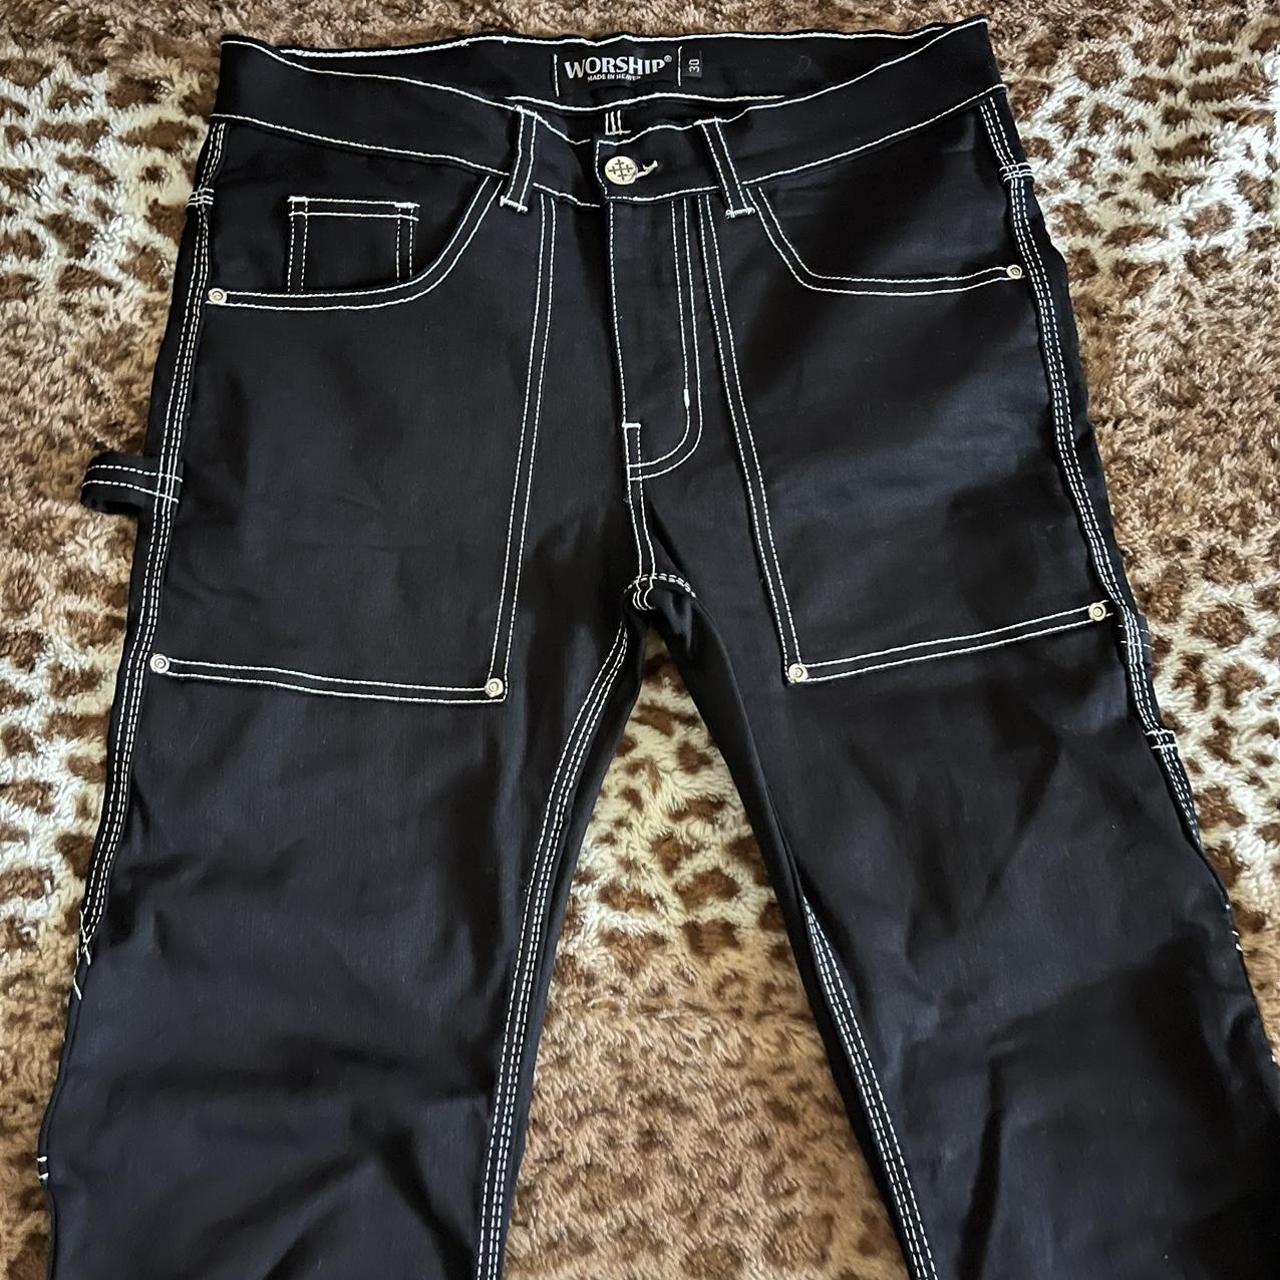 Jeans | Black Jeans With White Spots | Poshmark